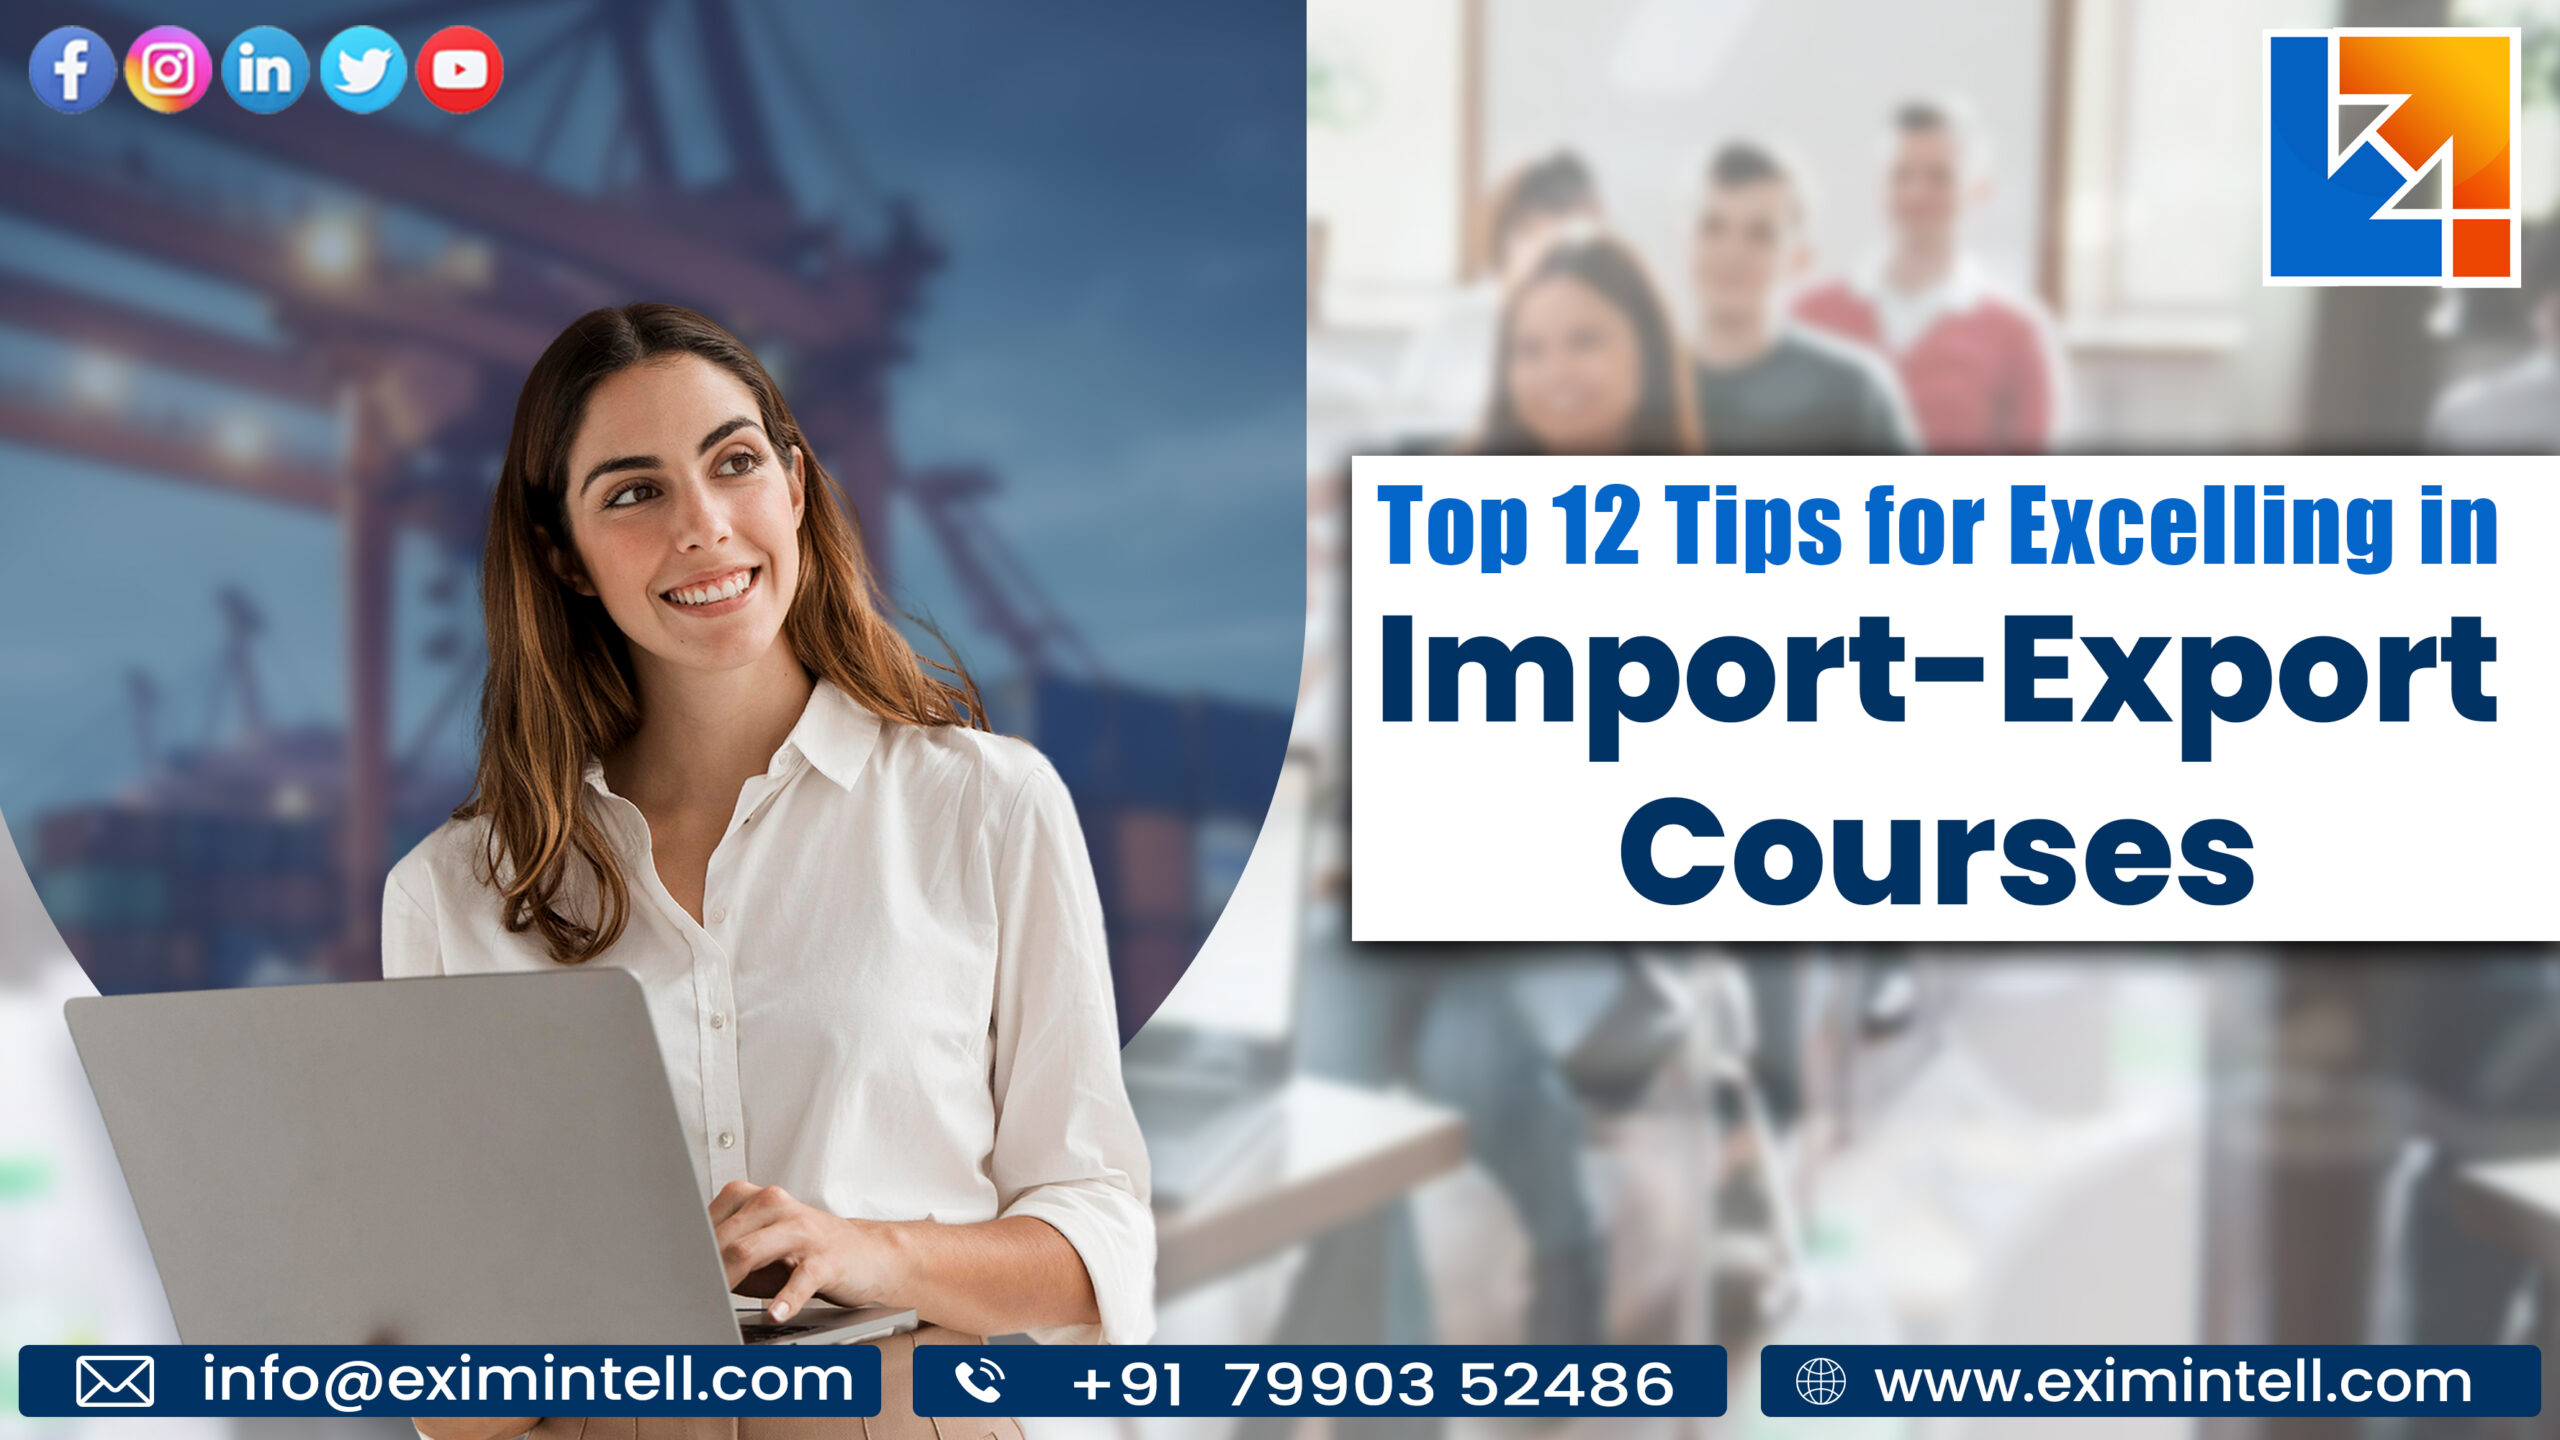 Top 12 Tips for Excelling in Import-Export Courses